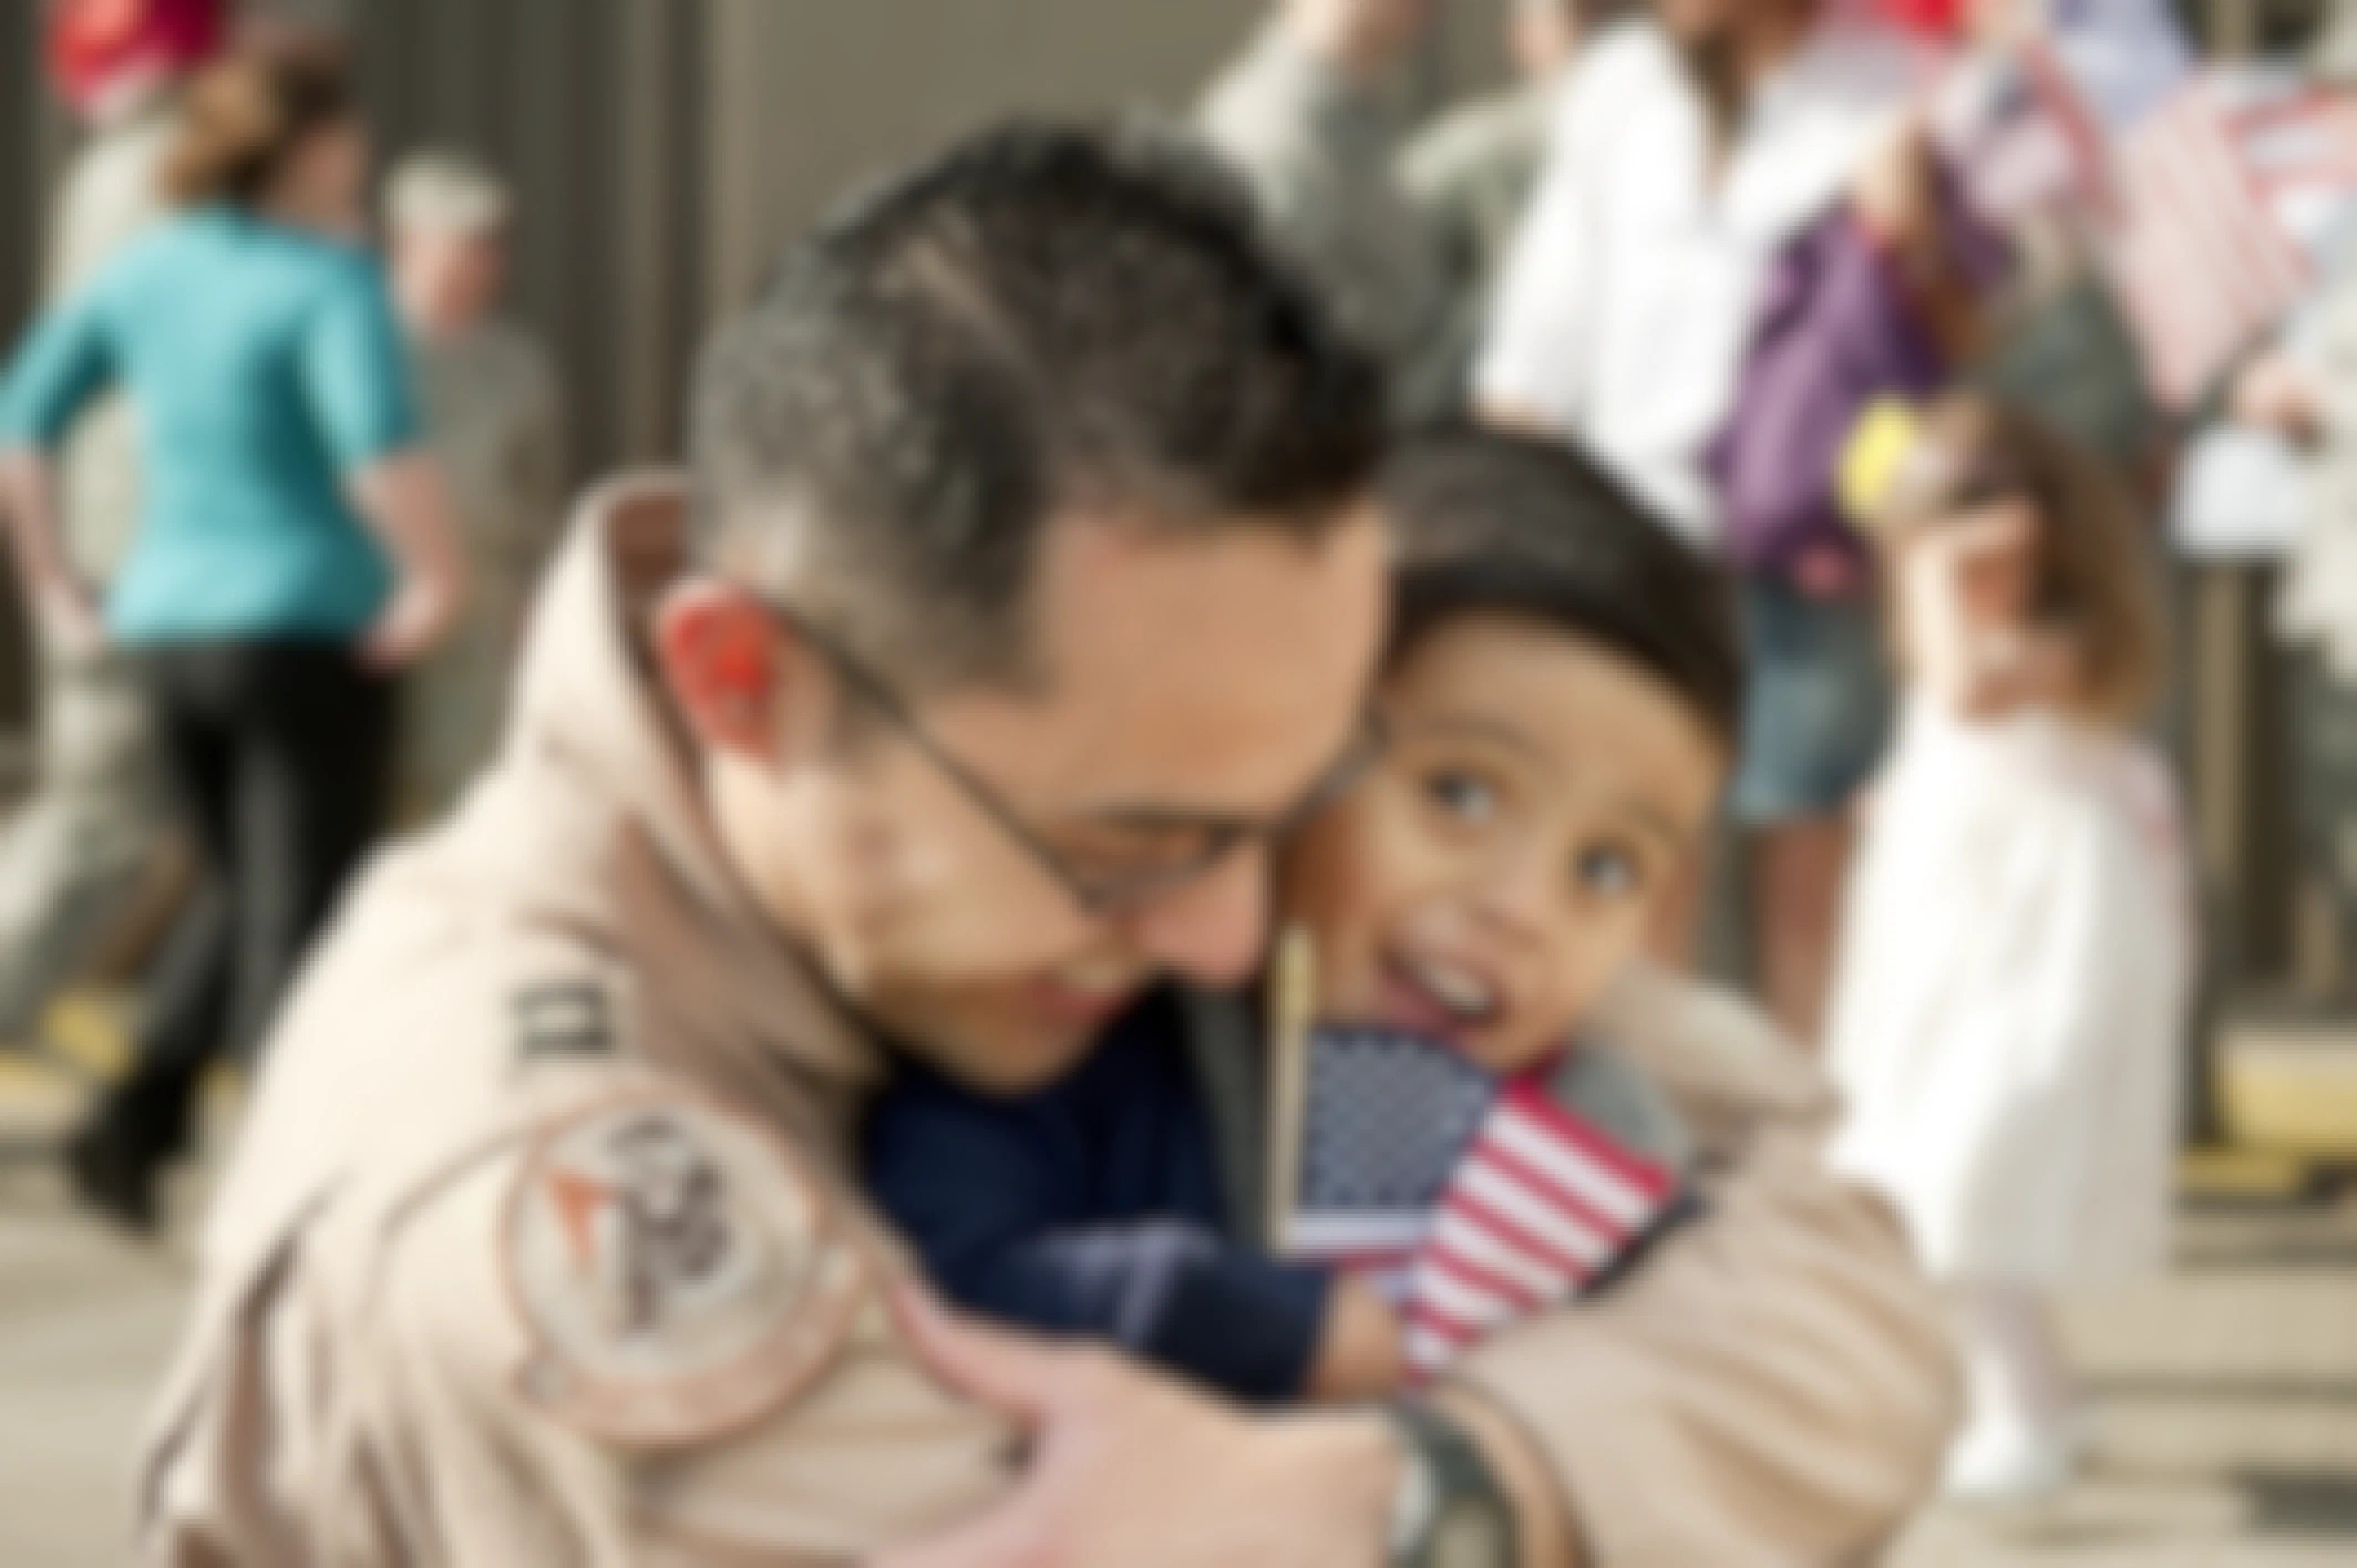 A military dad hugging his kid holding an American flag